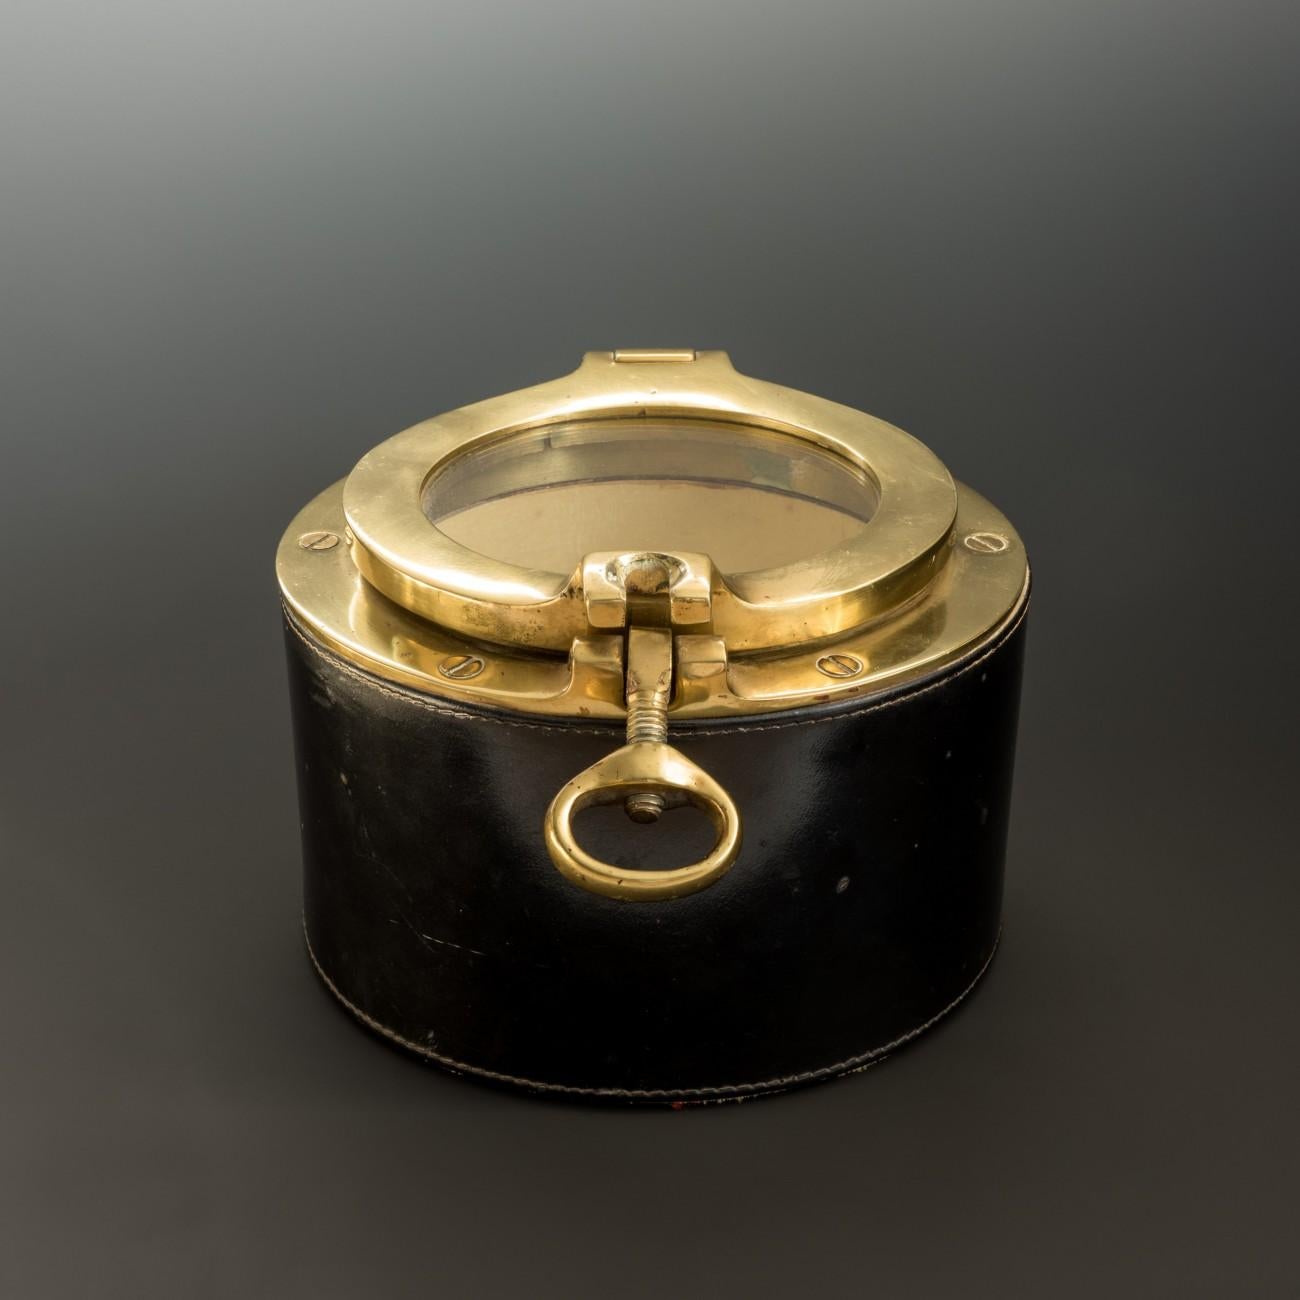 A stylish mid-20th century brass box modelled as a porthole with stitched leather covering, in the style of Jacques Adnet. Originally made for use as a tobacco jar, circa 1960.

Dimensions: 16.5 cm/6½ inches (diameter) x 10.5 cm/4? inches